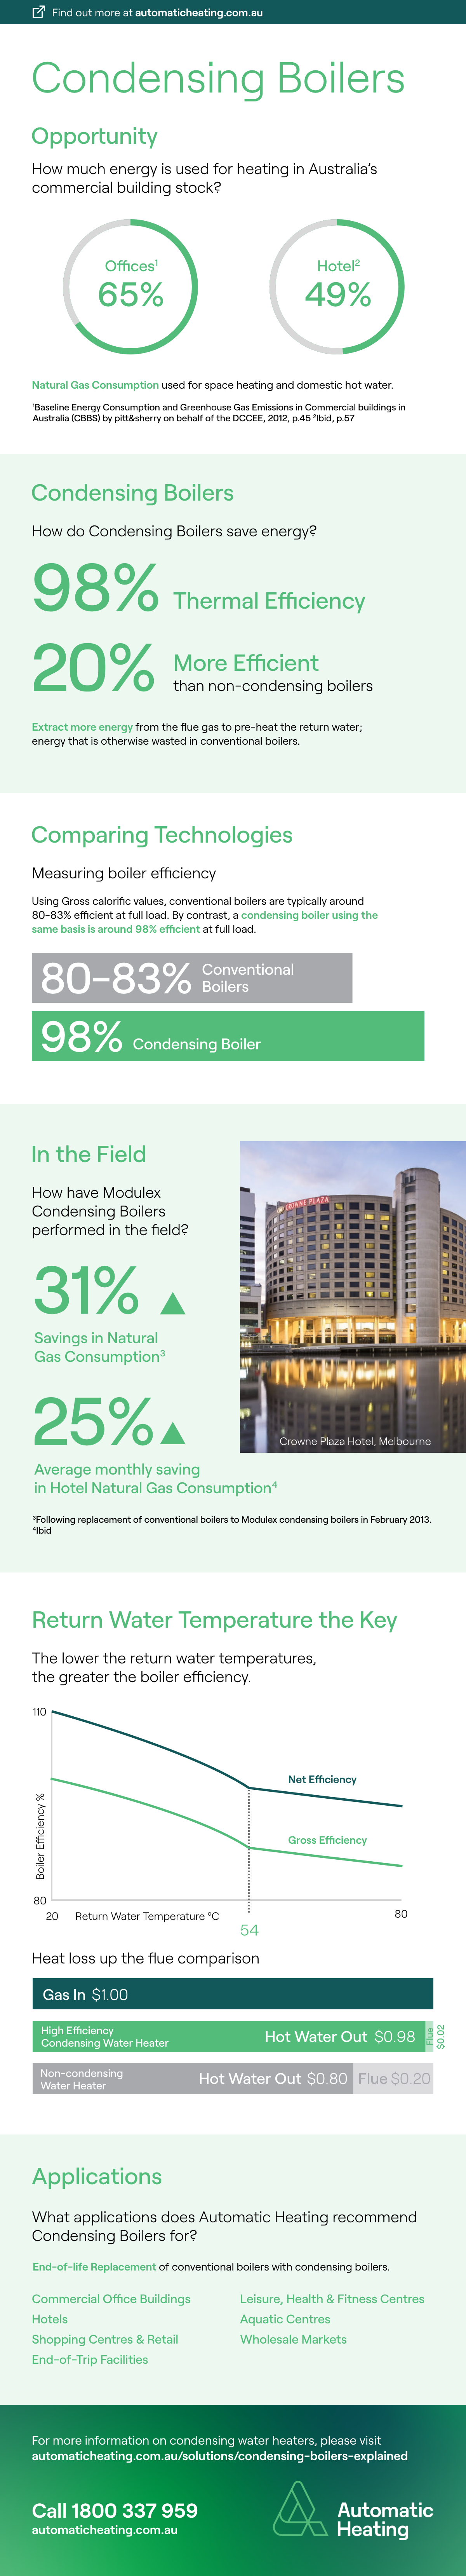 Condensing Boilers Key Facts Infographic